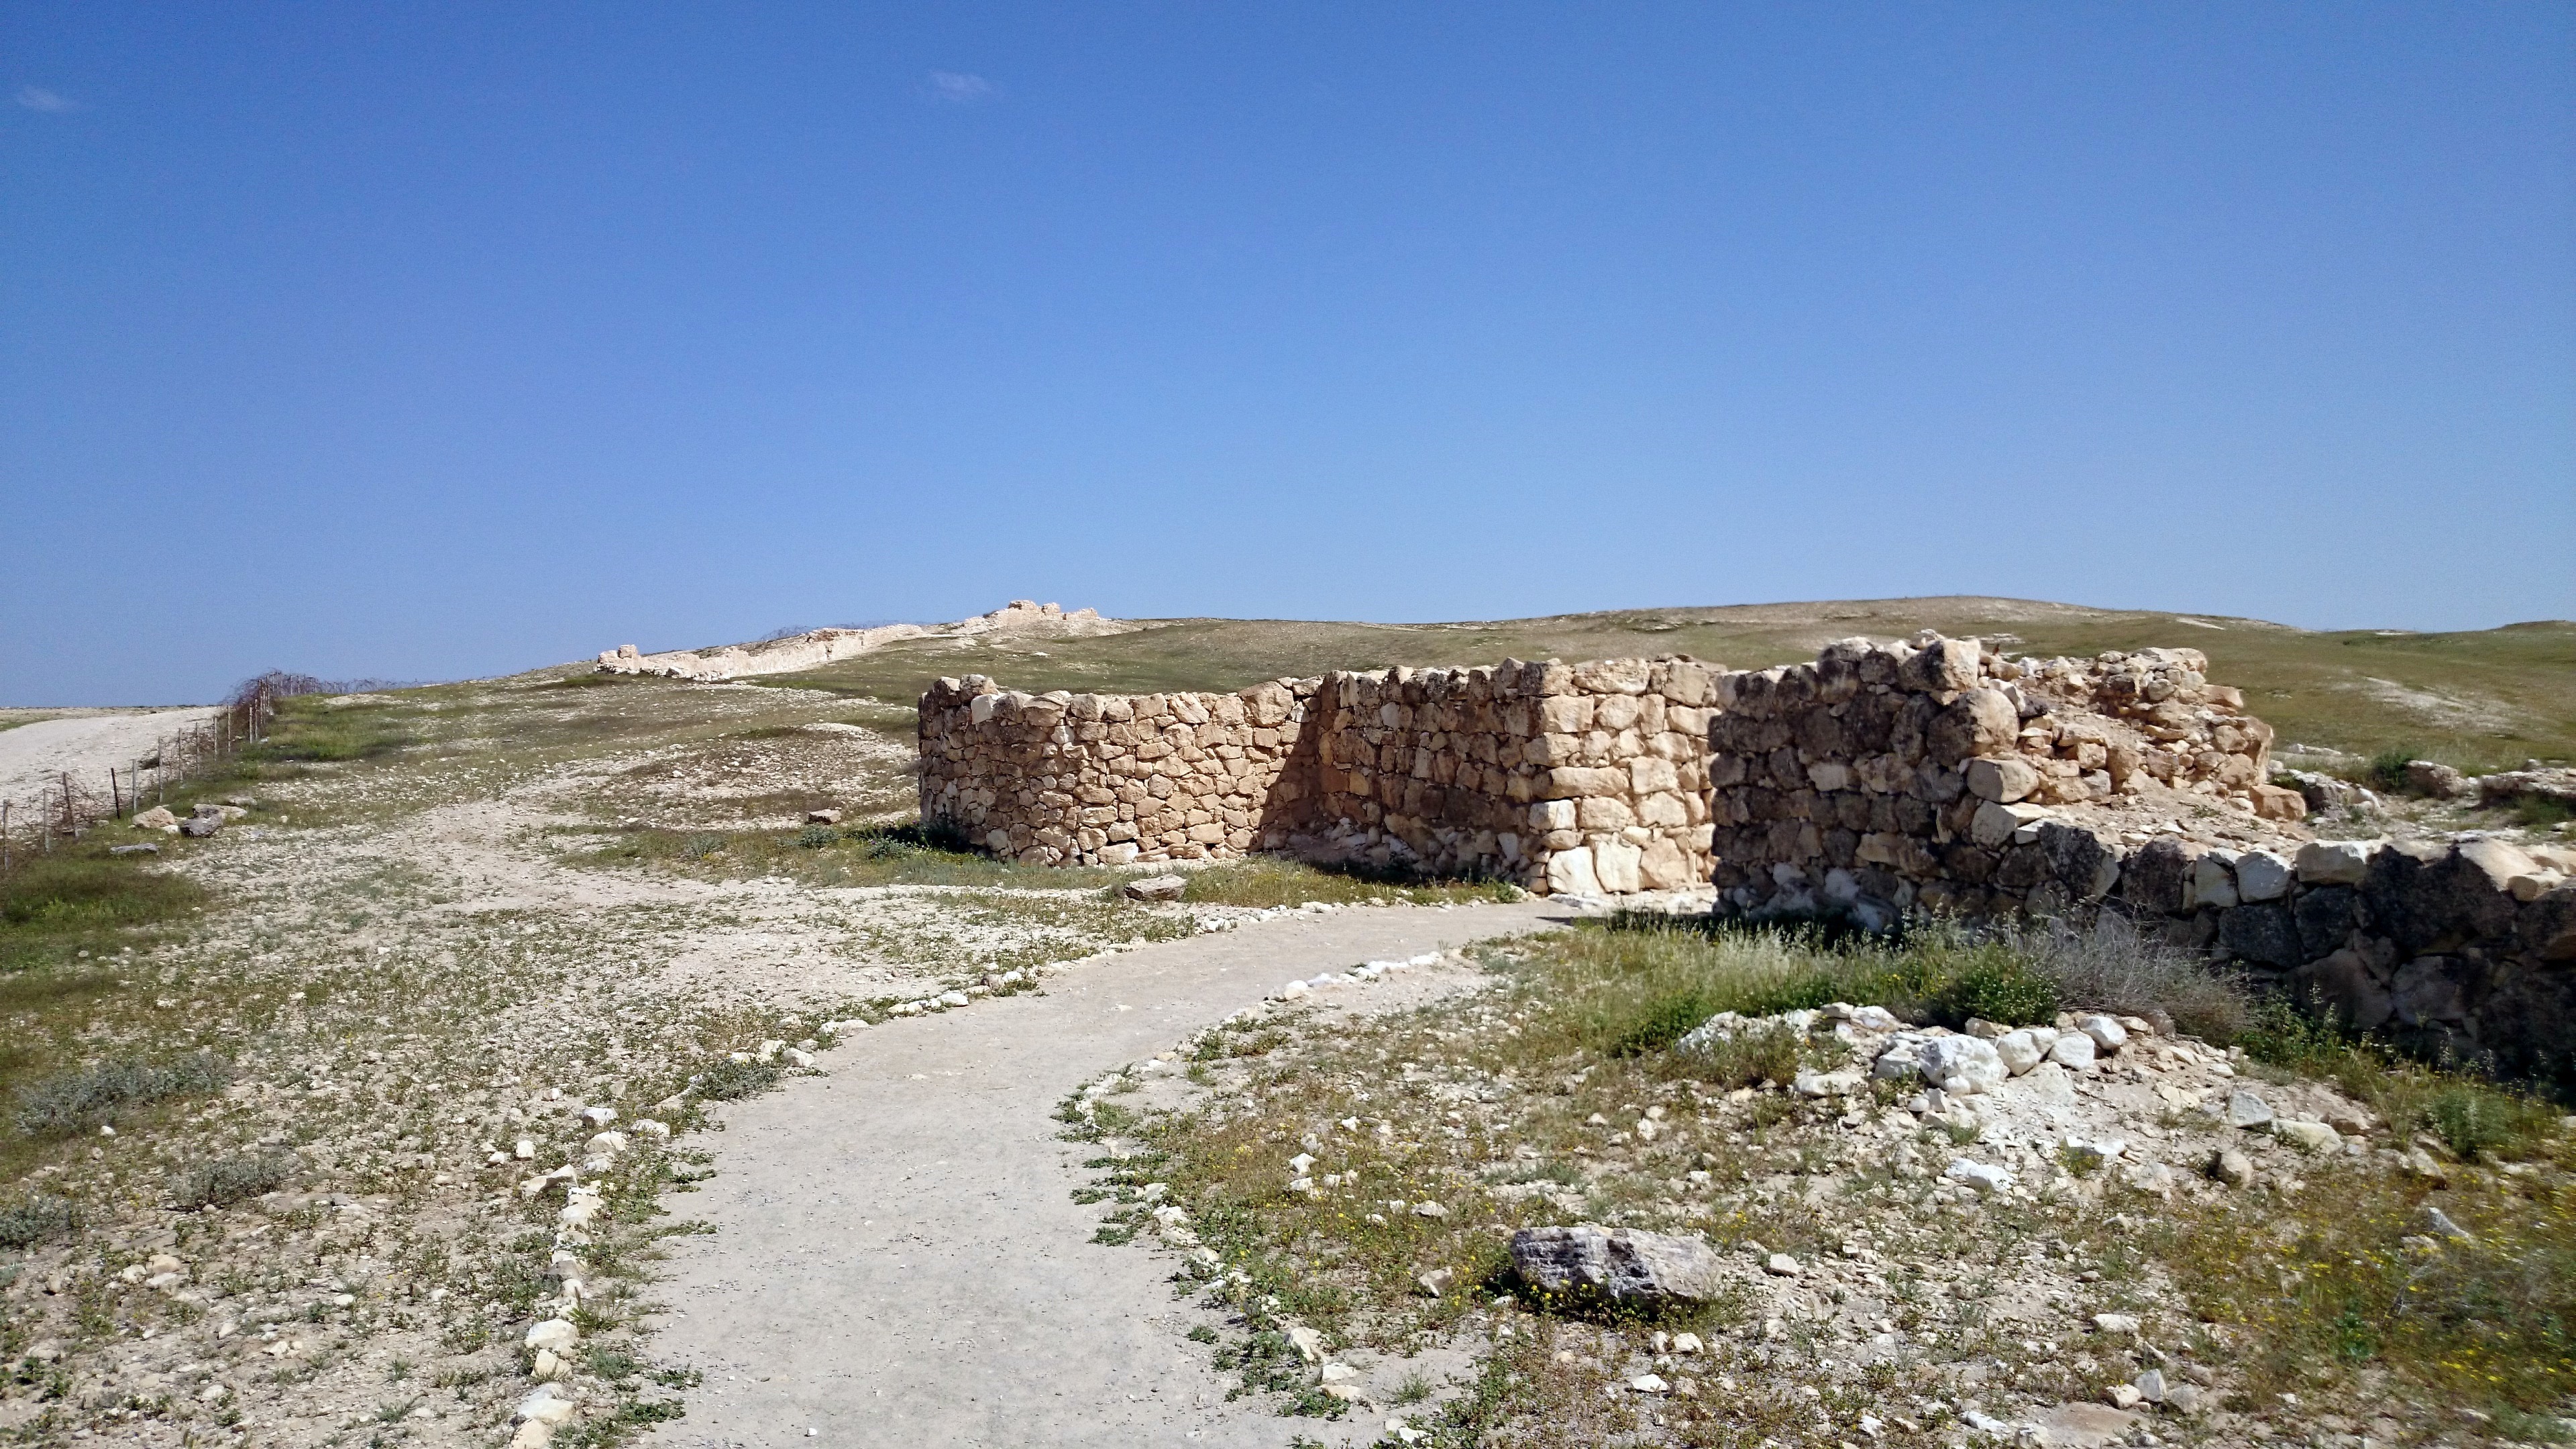 The Ancient City Of Tel Arad Negev Southern Israel Visions Of Travel